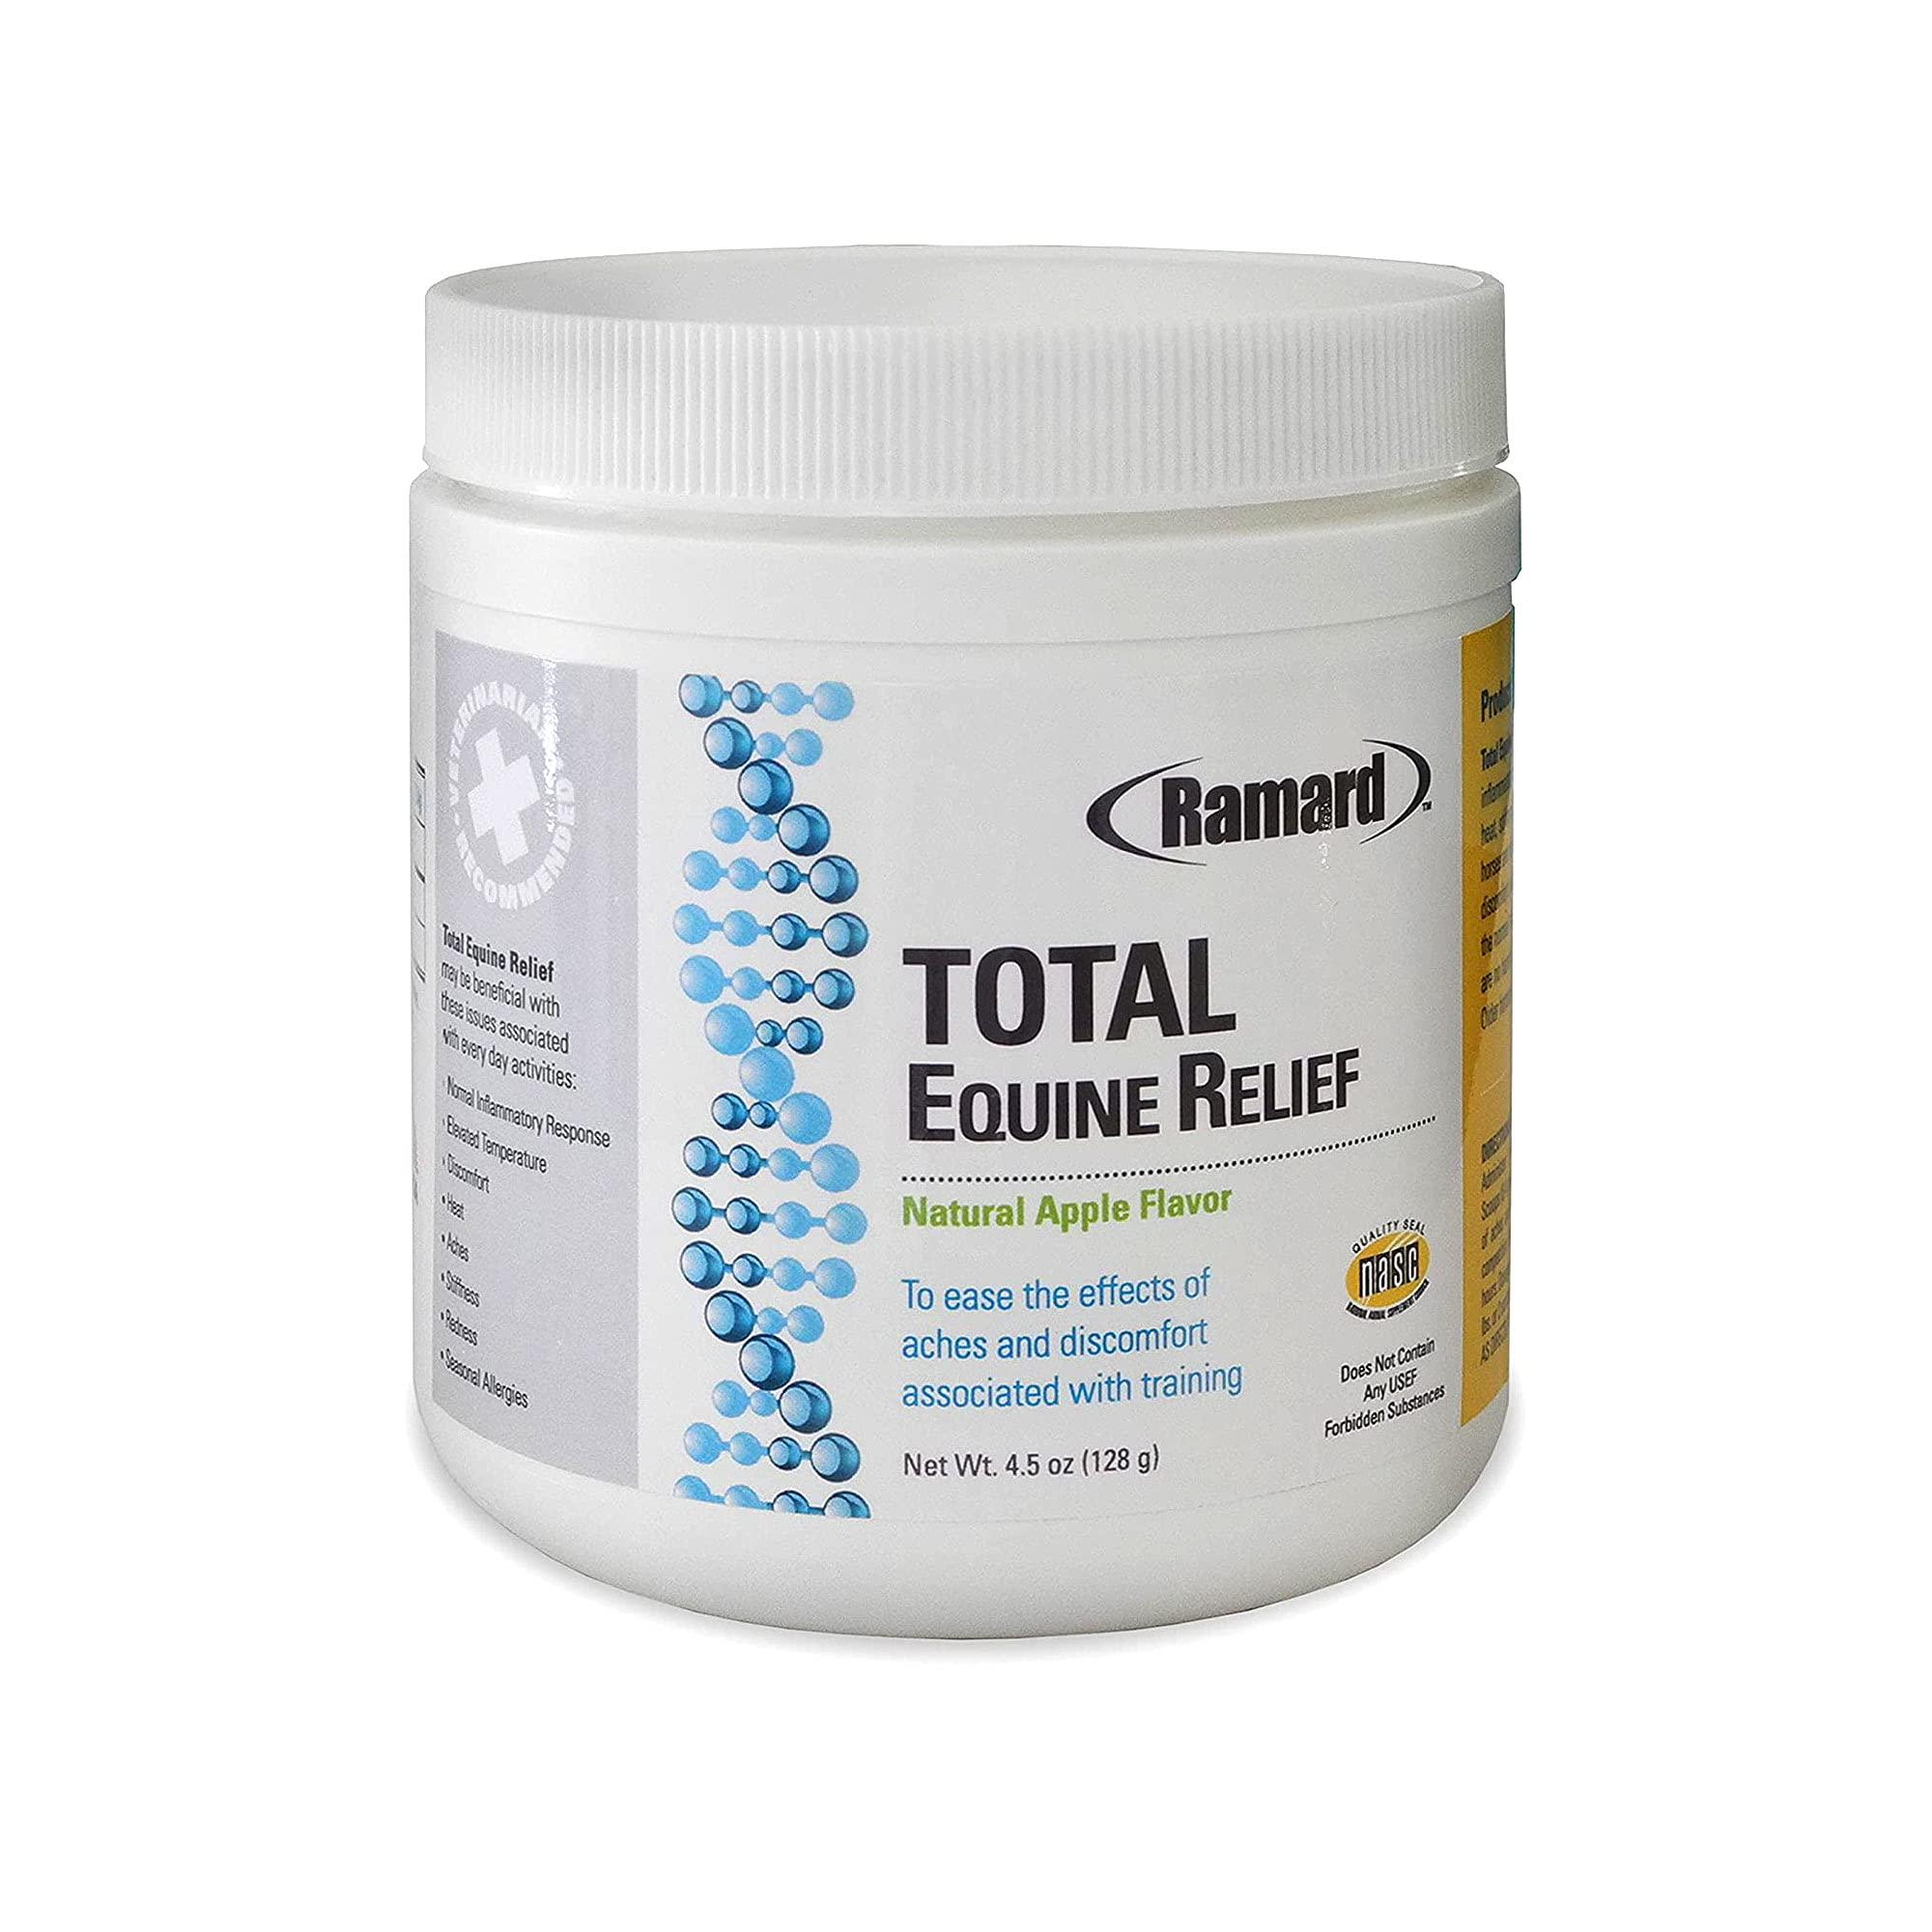 Ramard Total Equine Relief - Total Equine Supplement to Care for Joint & Tendon Health, Horse Feed to Address Swelling & Discomfort, Supplement for Horses\\\' Performance, 1 Jar Apple Flavor (4.5 oz).